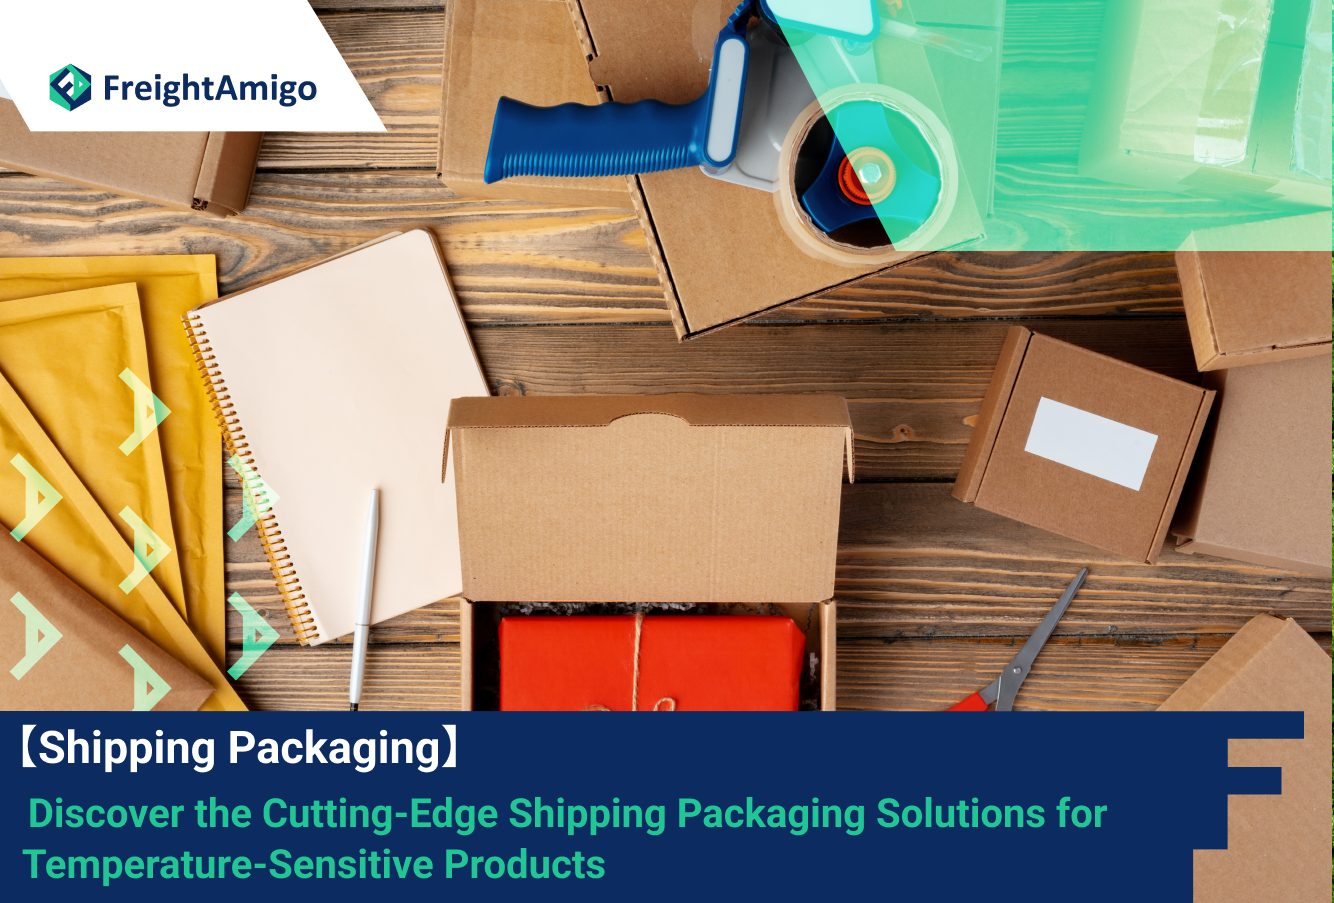 【Shipping Packaging】 Discover the Cutting-Edge Shipping Packaging Solutions for Temperature-Sensitive Products